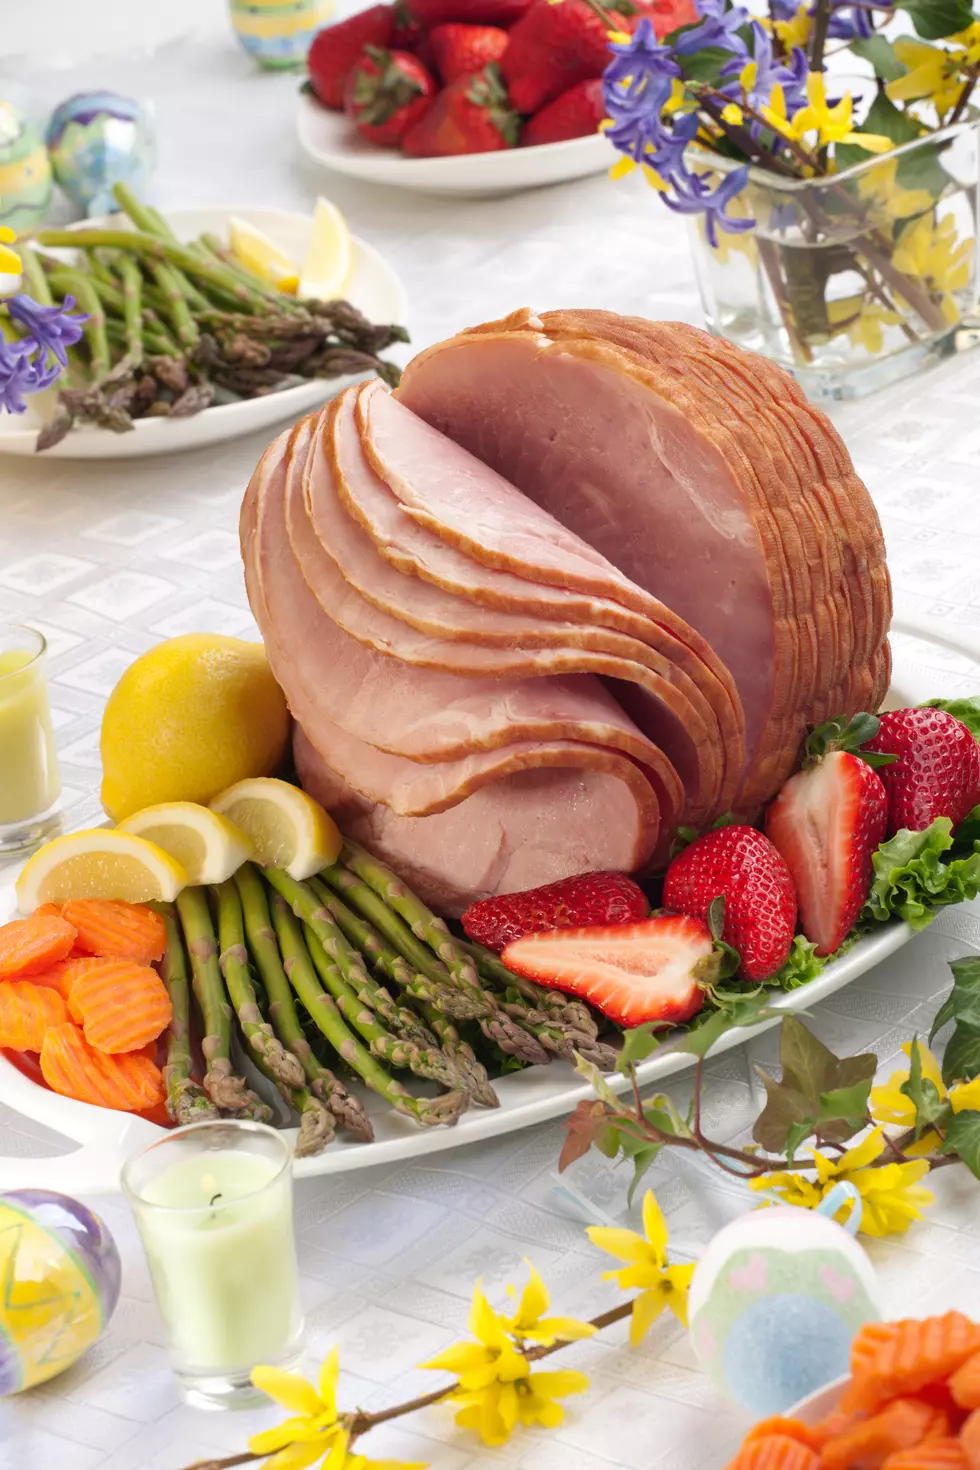 Sioux Falls Hy-Vee to Give Away Hams for the Holidays